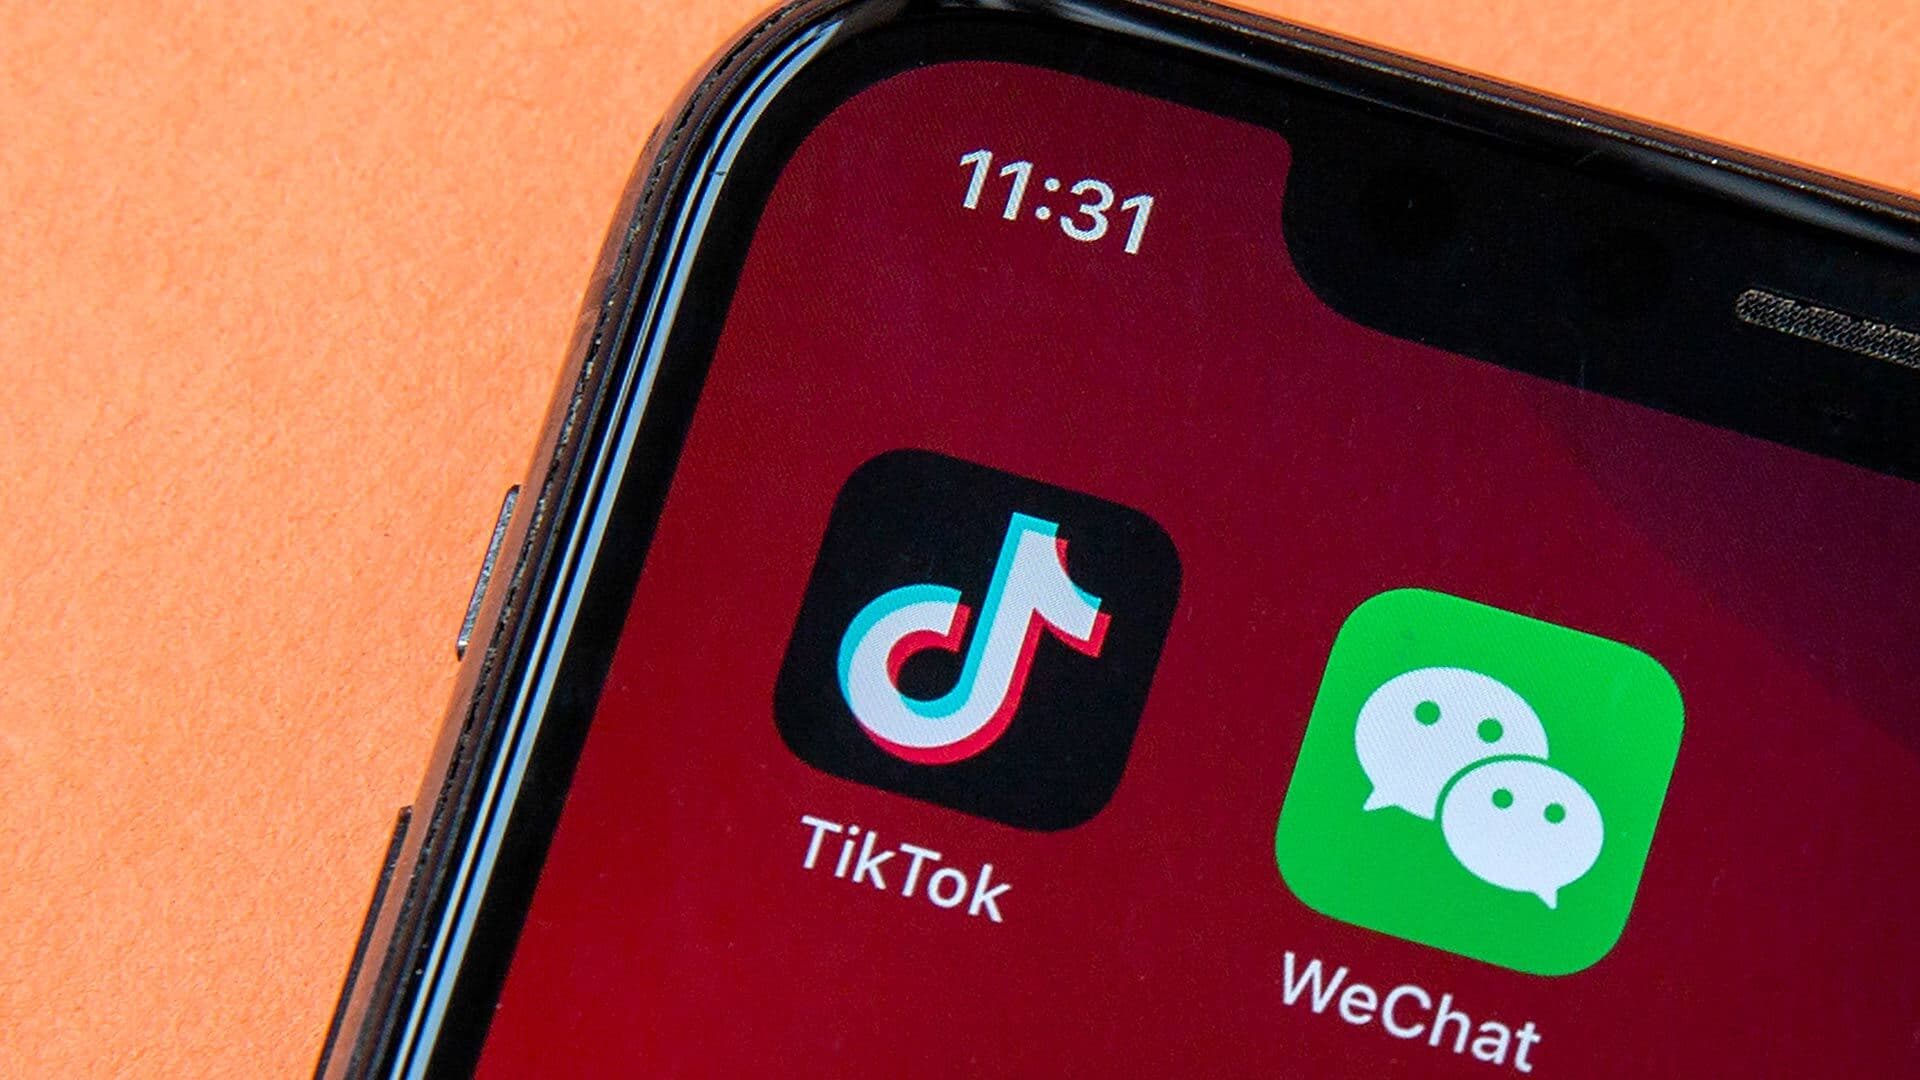 Smartphone showing TikTok and WeChat apps